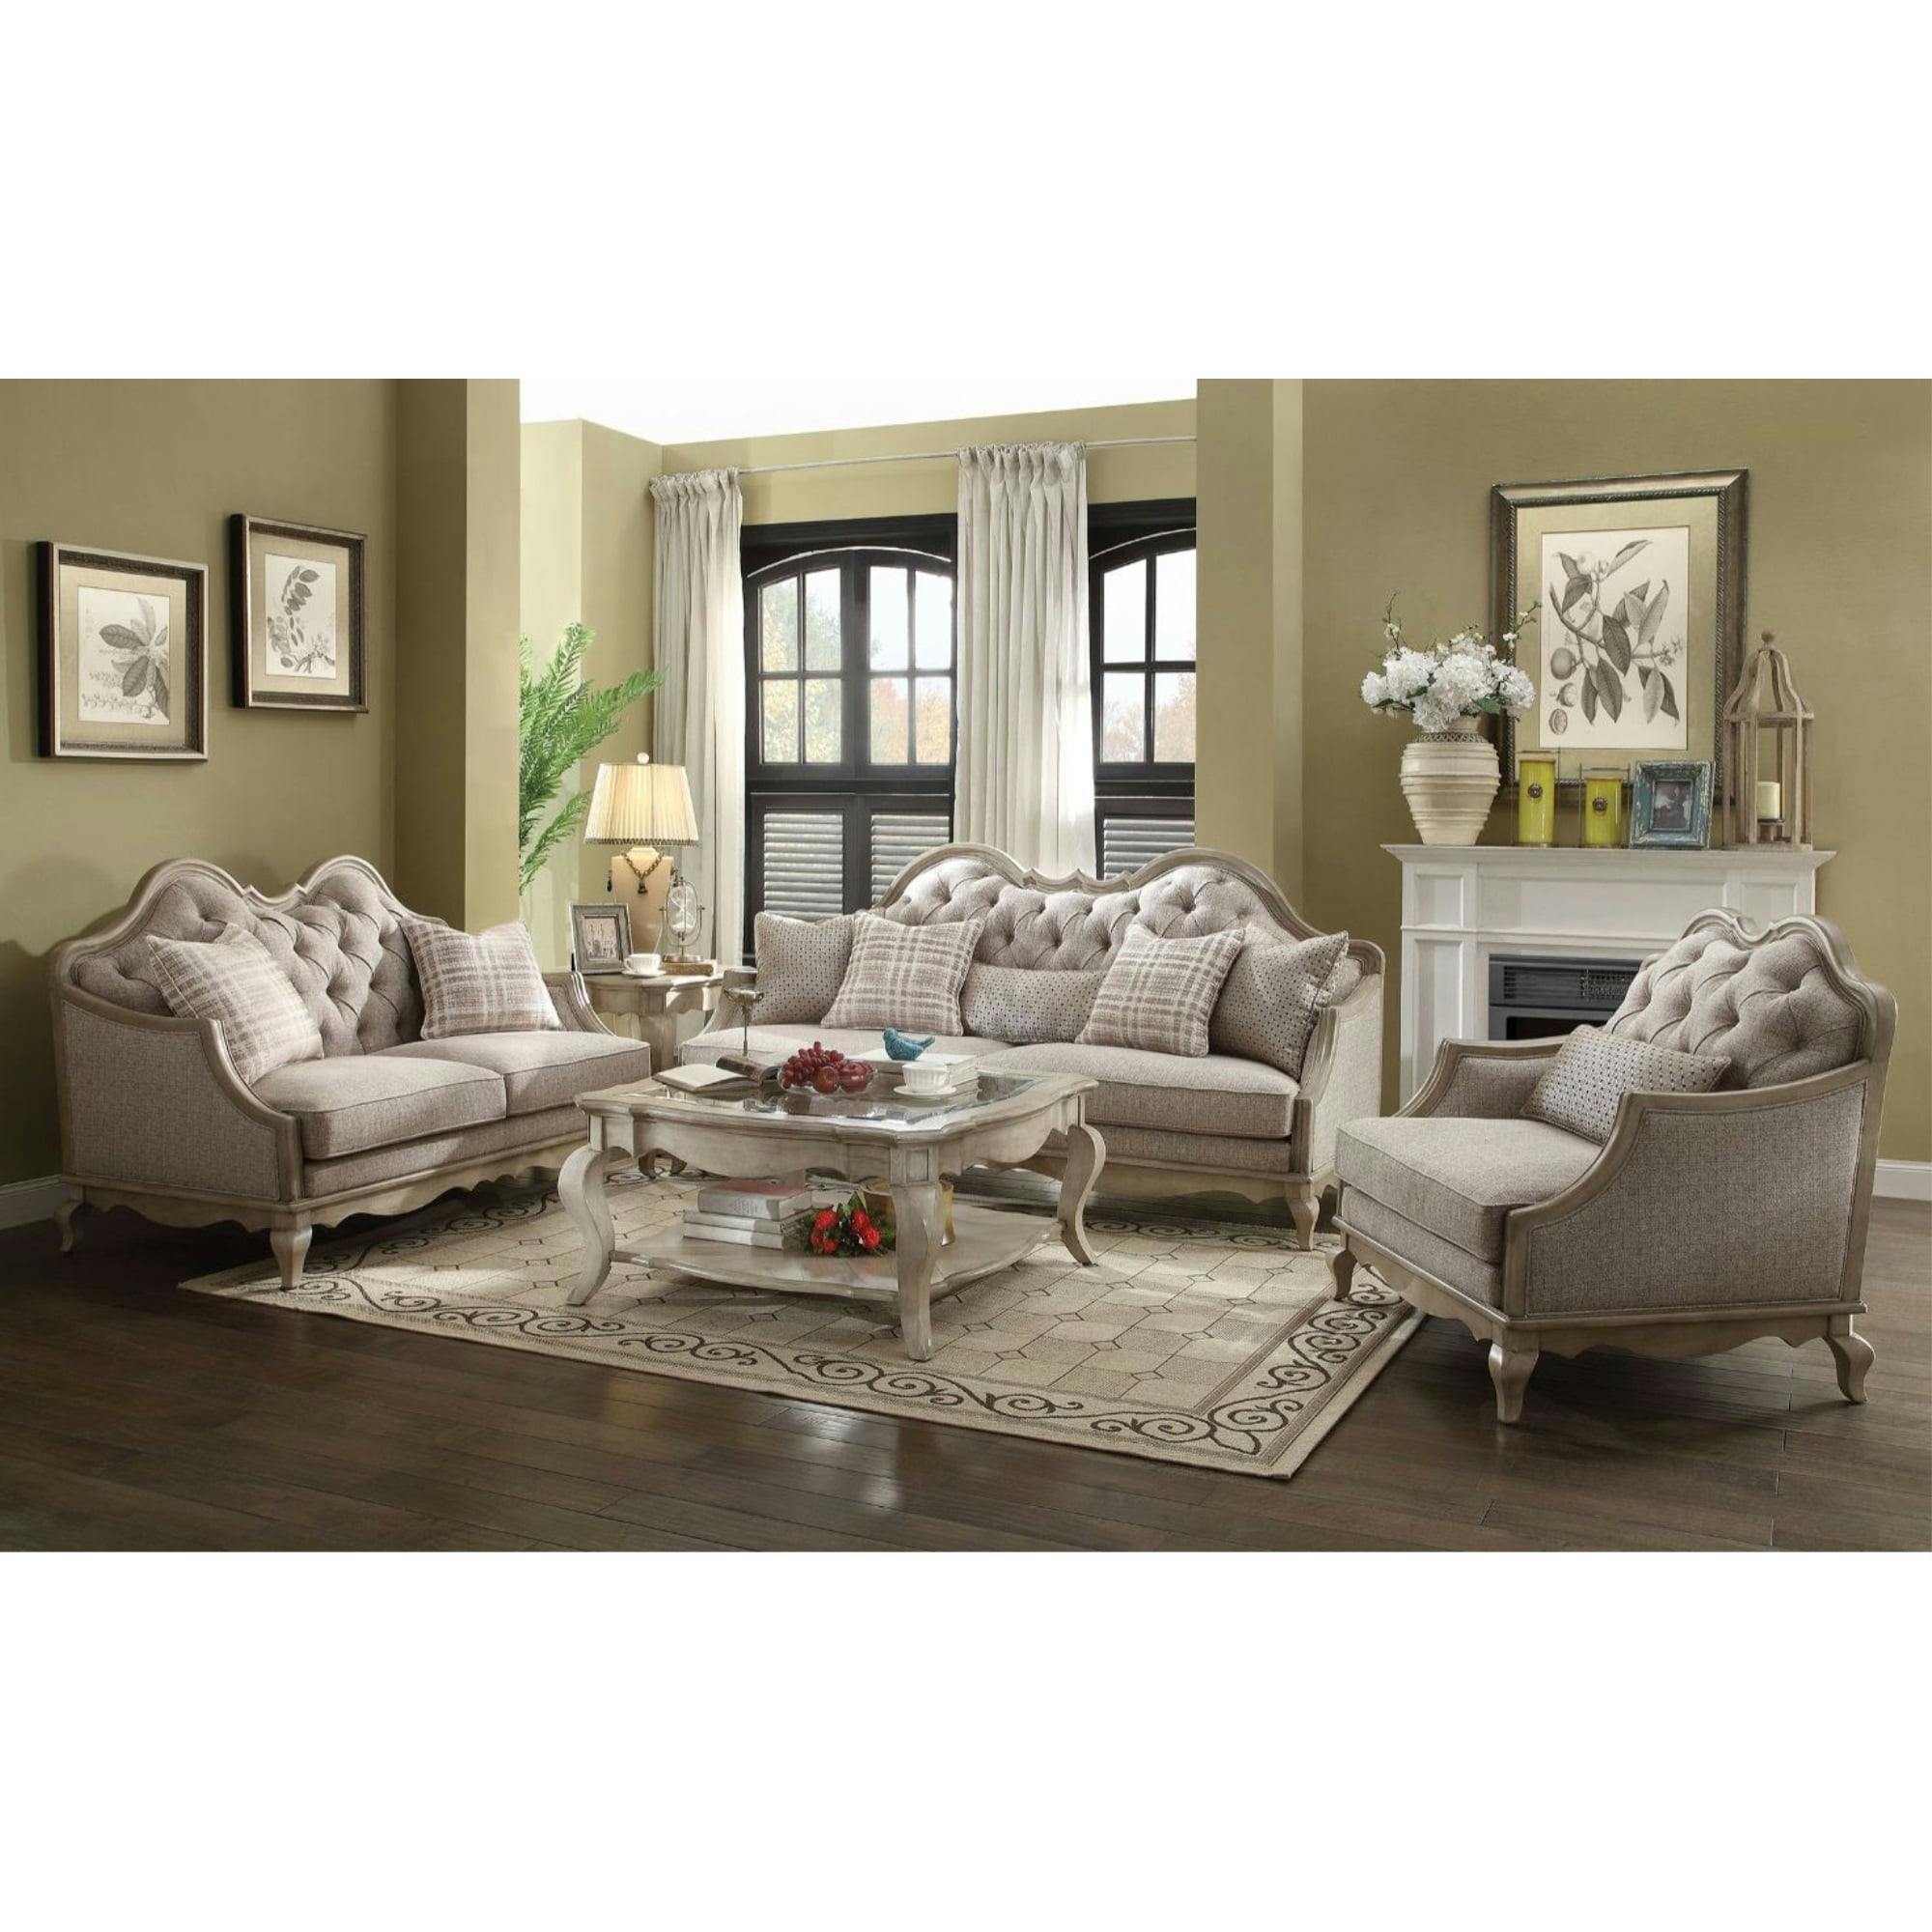 Chelmsford Beige Fabric Tufted Sofa with Antique Taupe Wood Accents